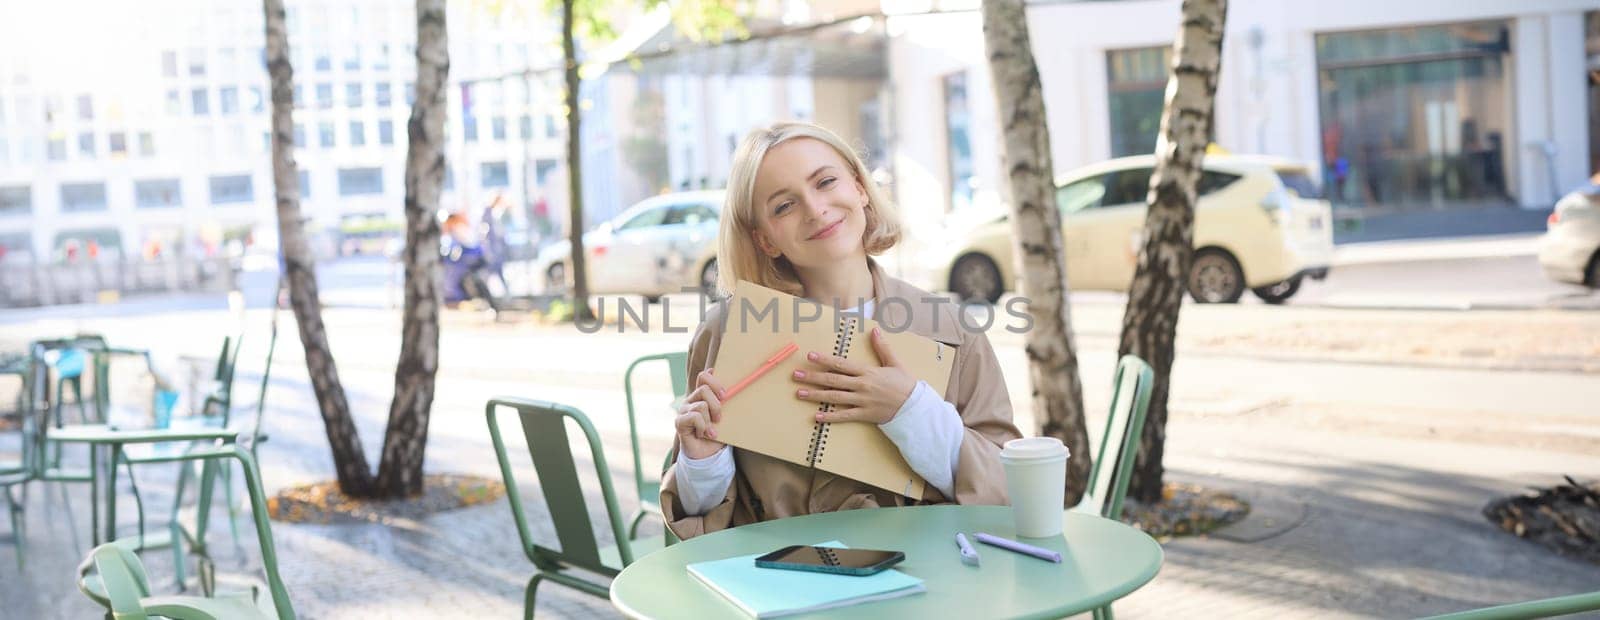 Image of young smiling blond woman sitting in an outdoor cafe, holding notebook, doing her homework outside in coffee shop, looking happy.